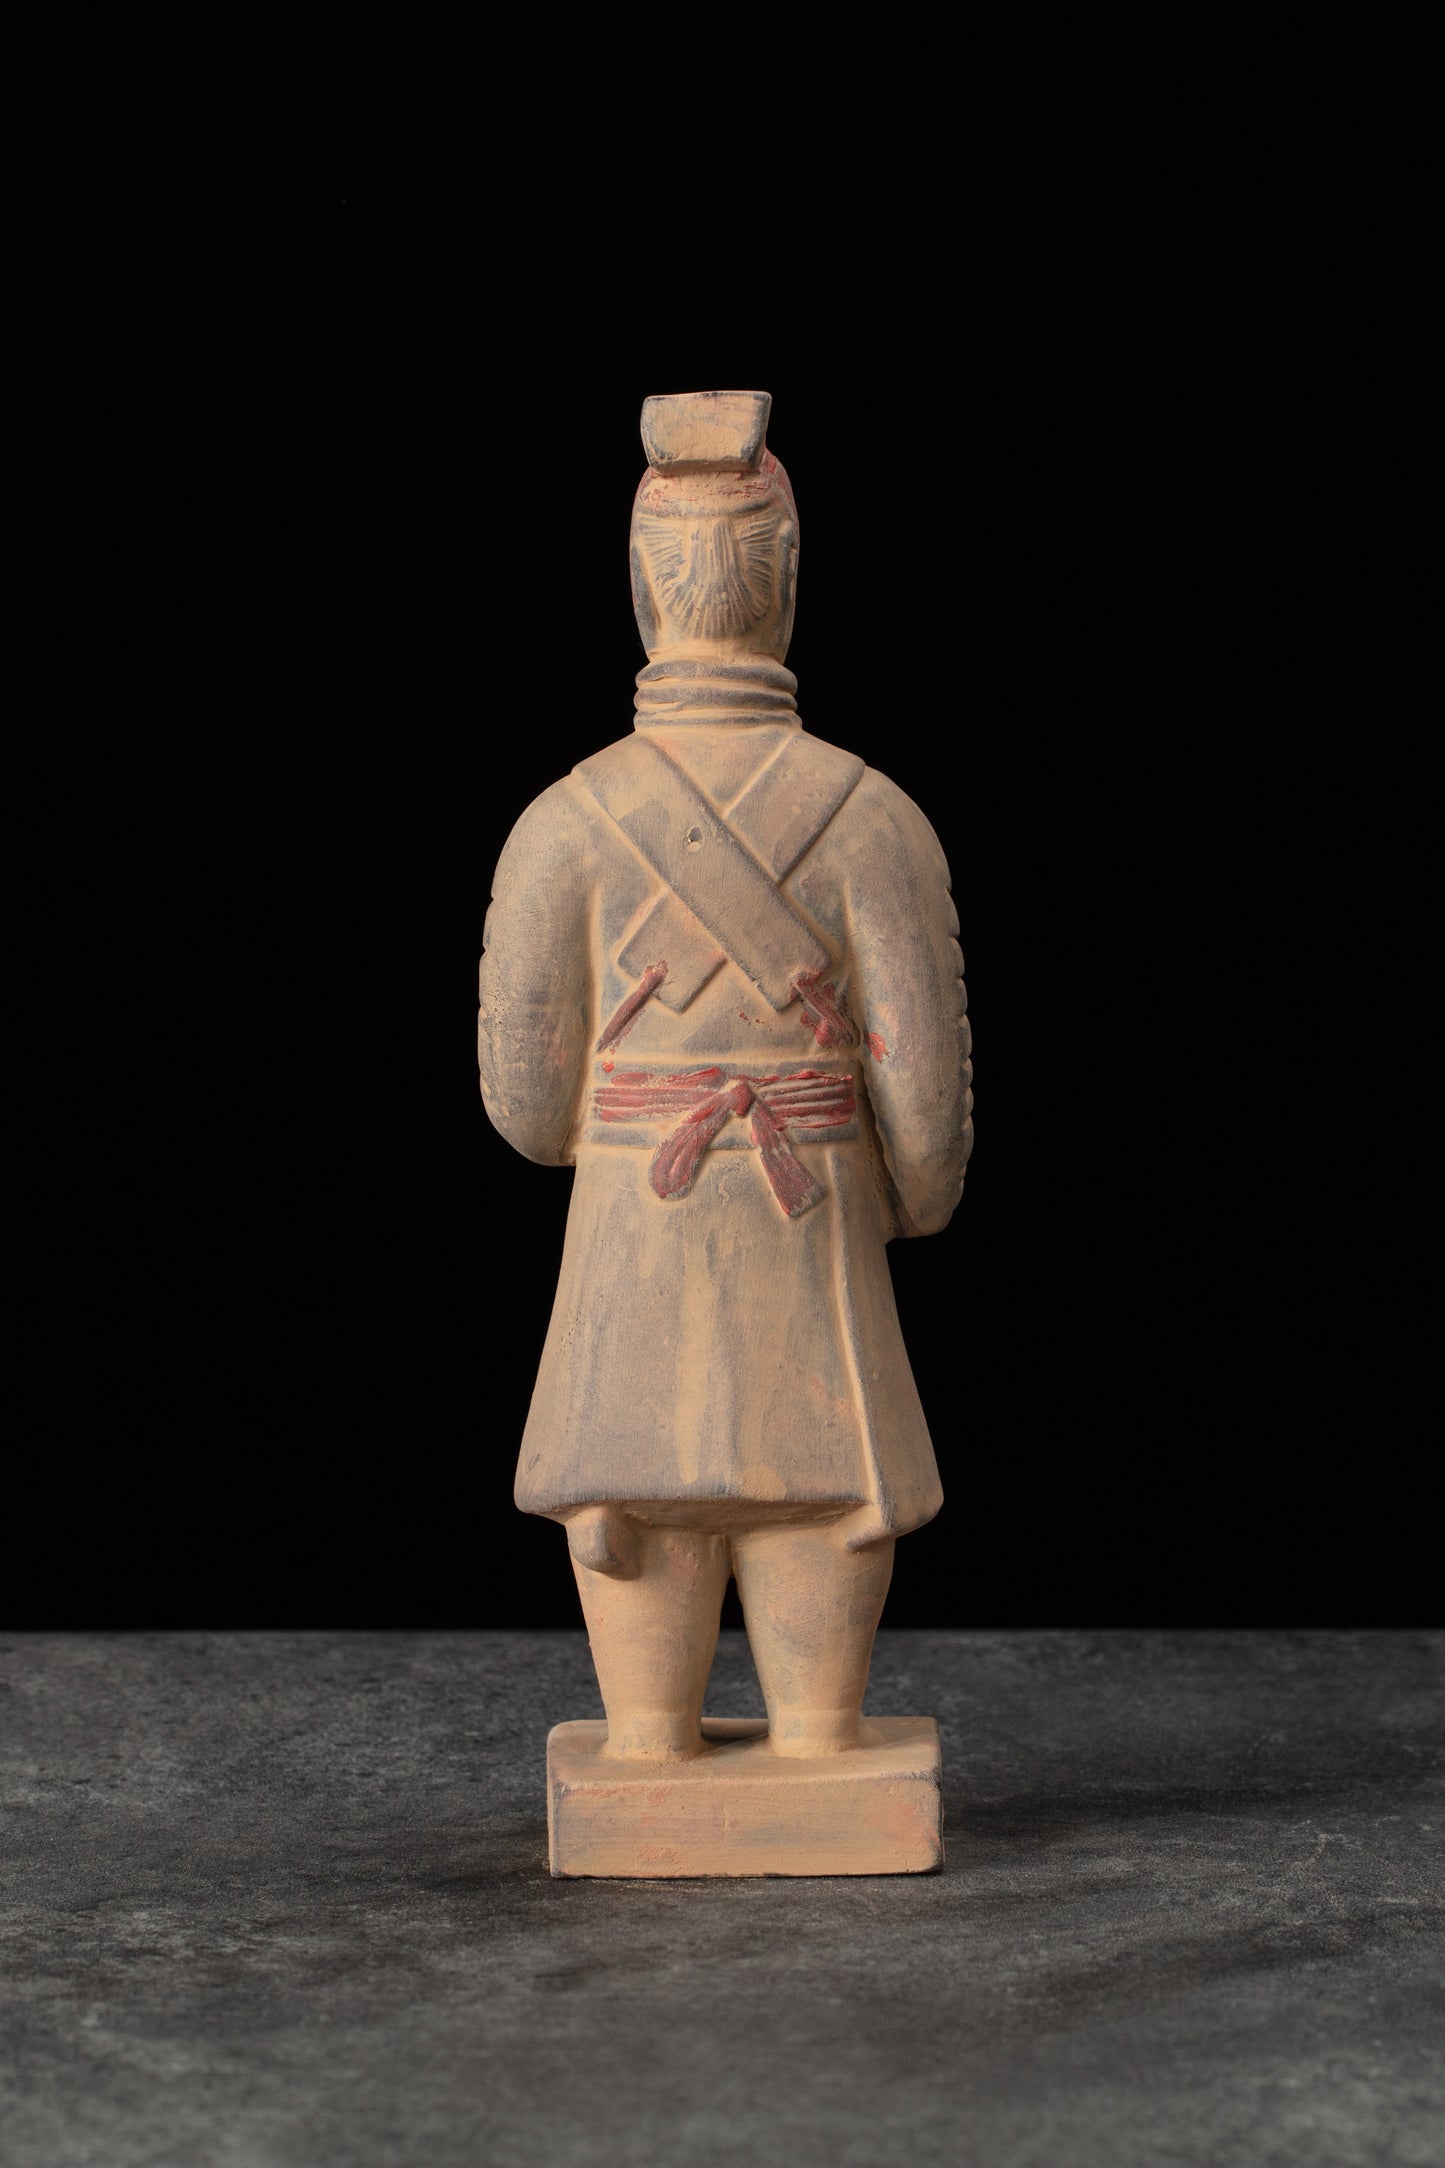 20CM Painted Officier - CLAYARMY-Back view showcasing the painted double-tailed crossbill crown and layered jacket of the 20CM Officer figurine.